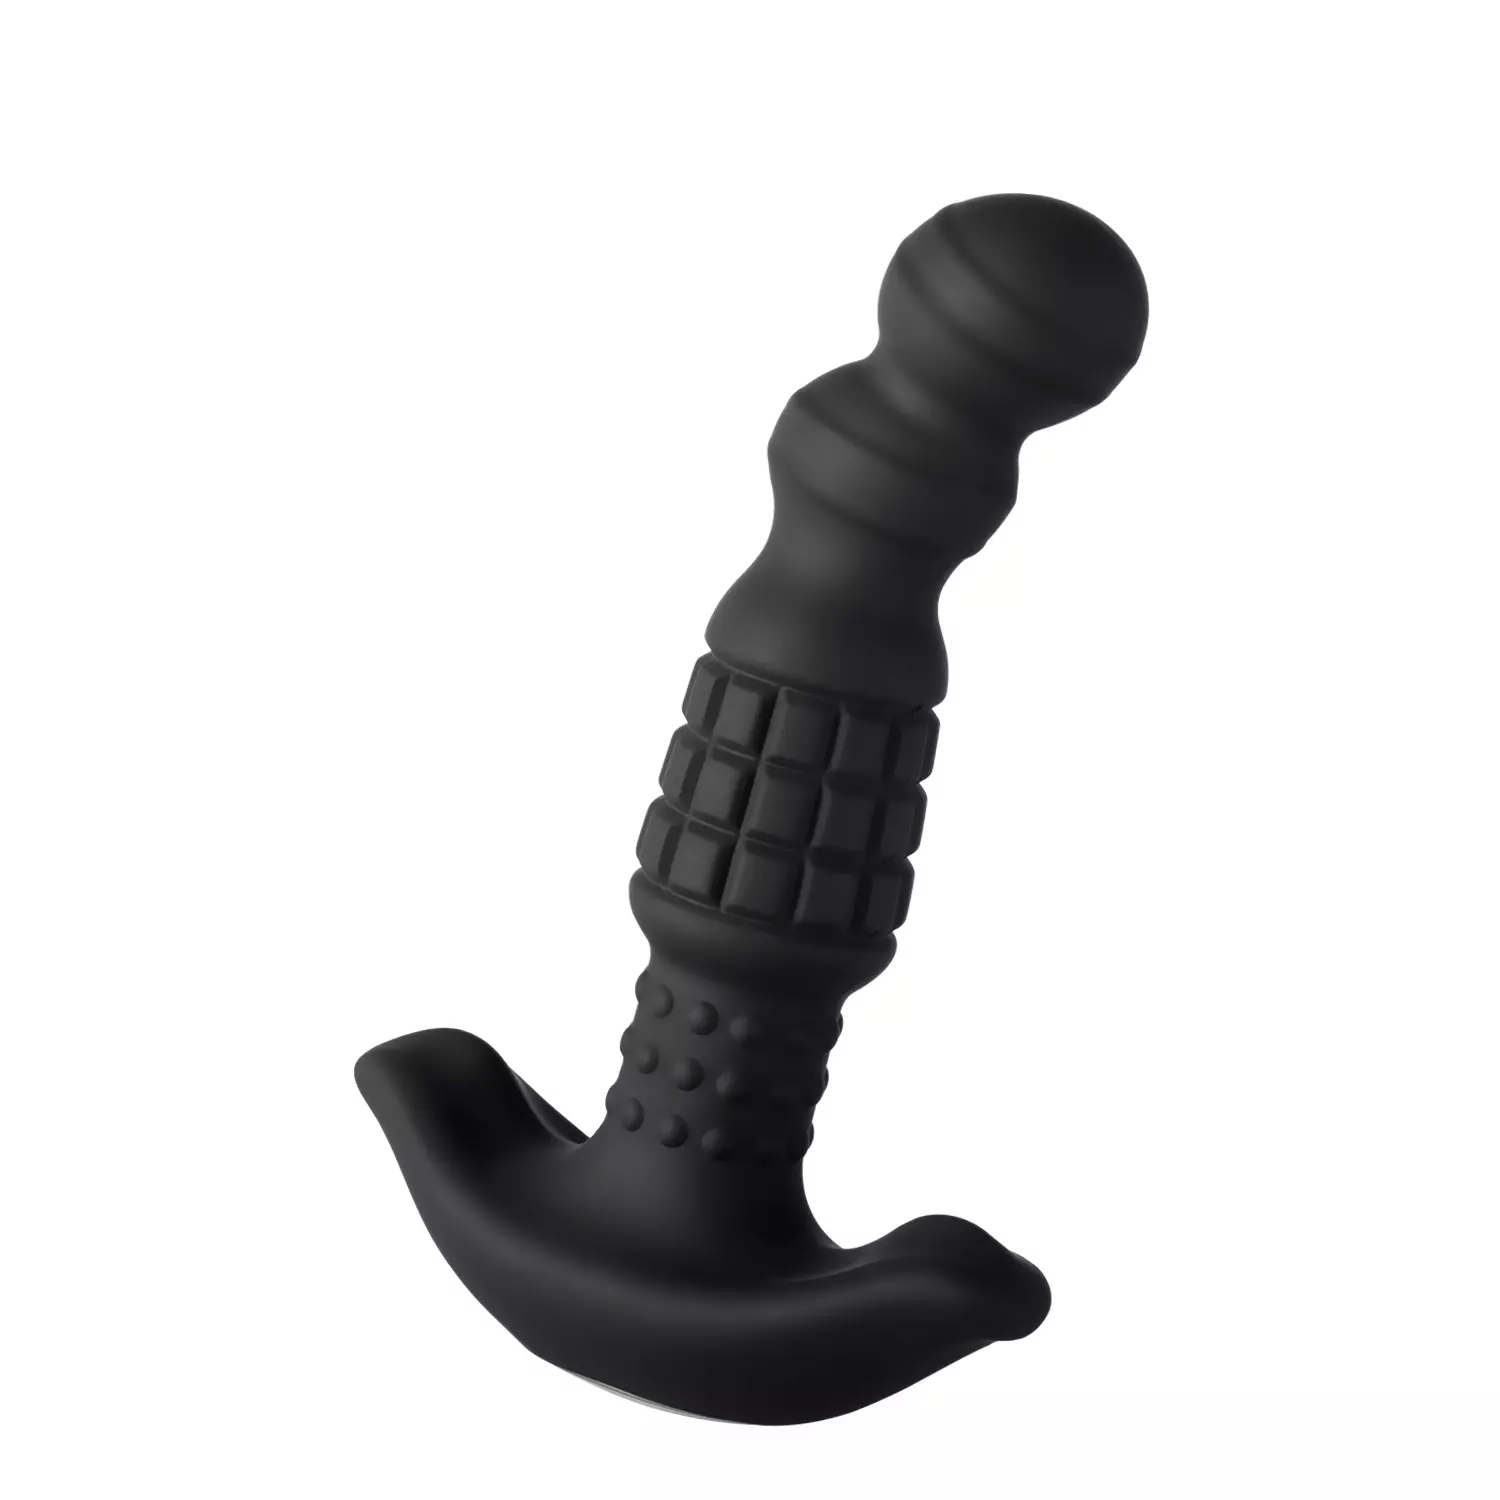 Pineapple Man Prostate Massager - Rolling Bead Vibrations for Ultimate Pleasure-BestGSpot